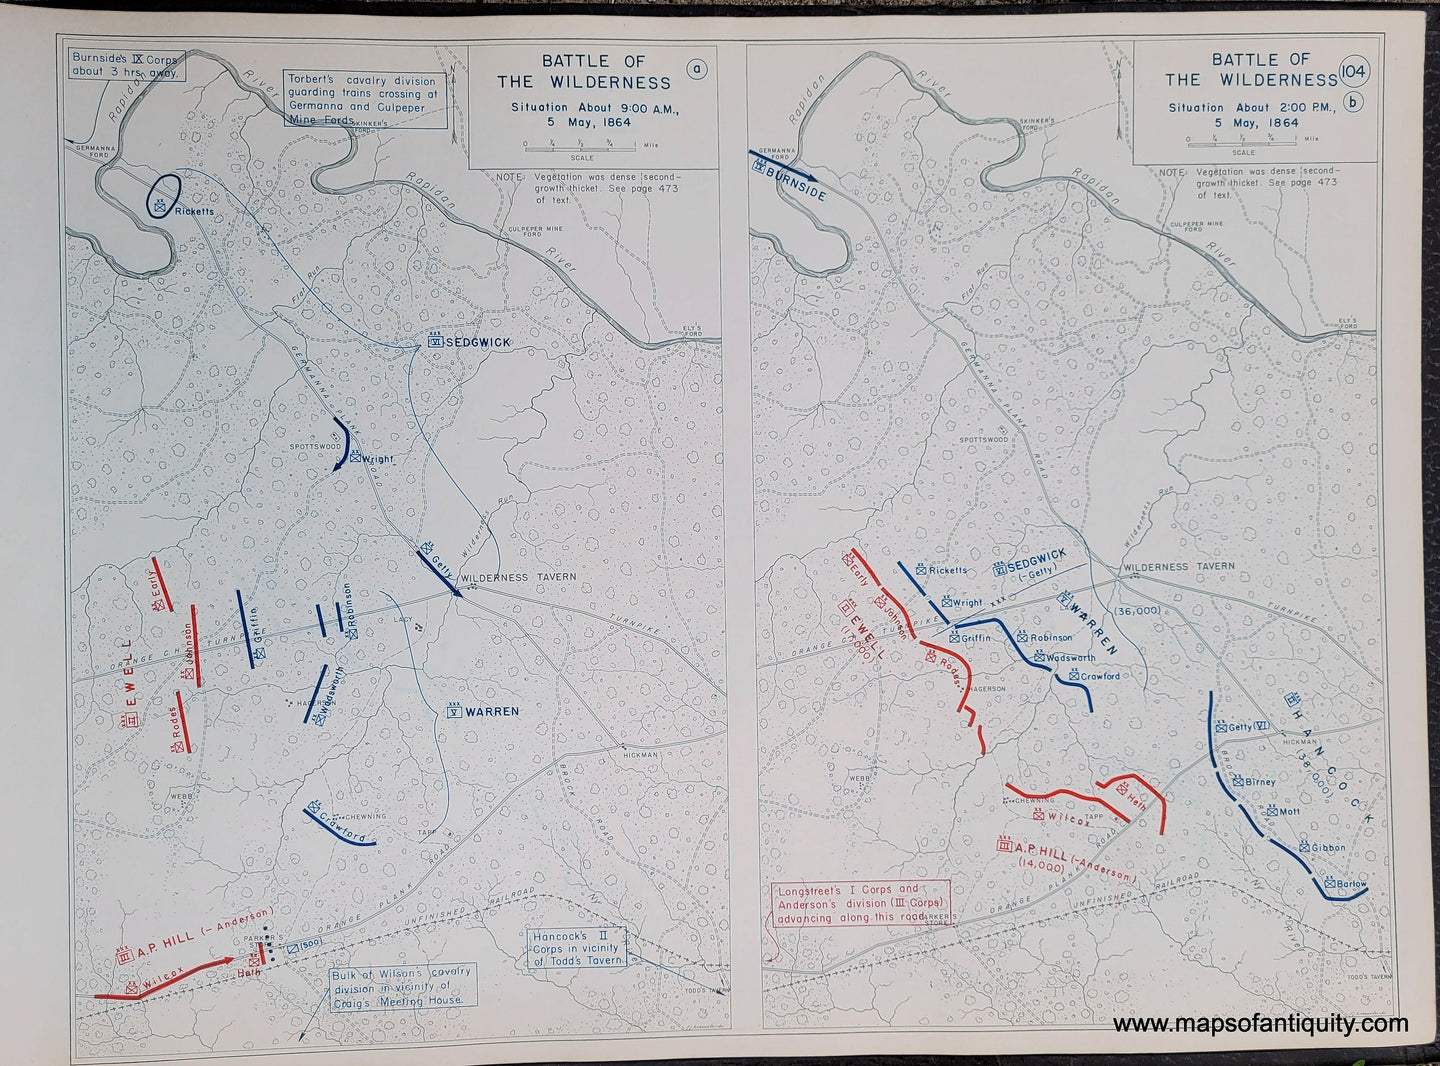 Genuine-Antique-Map-Battle-of-the-Wilderness-Situation-About-9-00-AM-5-May-1864-and-Situation-About-2-00-PM-5-May-1864-1948-Matthew-Forney-Steele-Dept-of-Military-Art-and-Engineering-US-Military-Academy-West-Point-Maps-Of-Antiquity